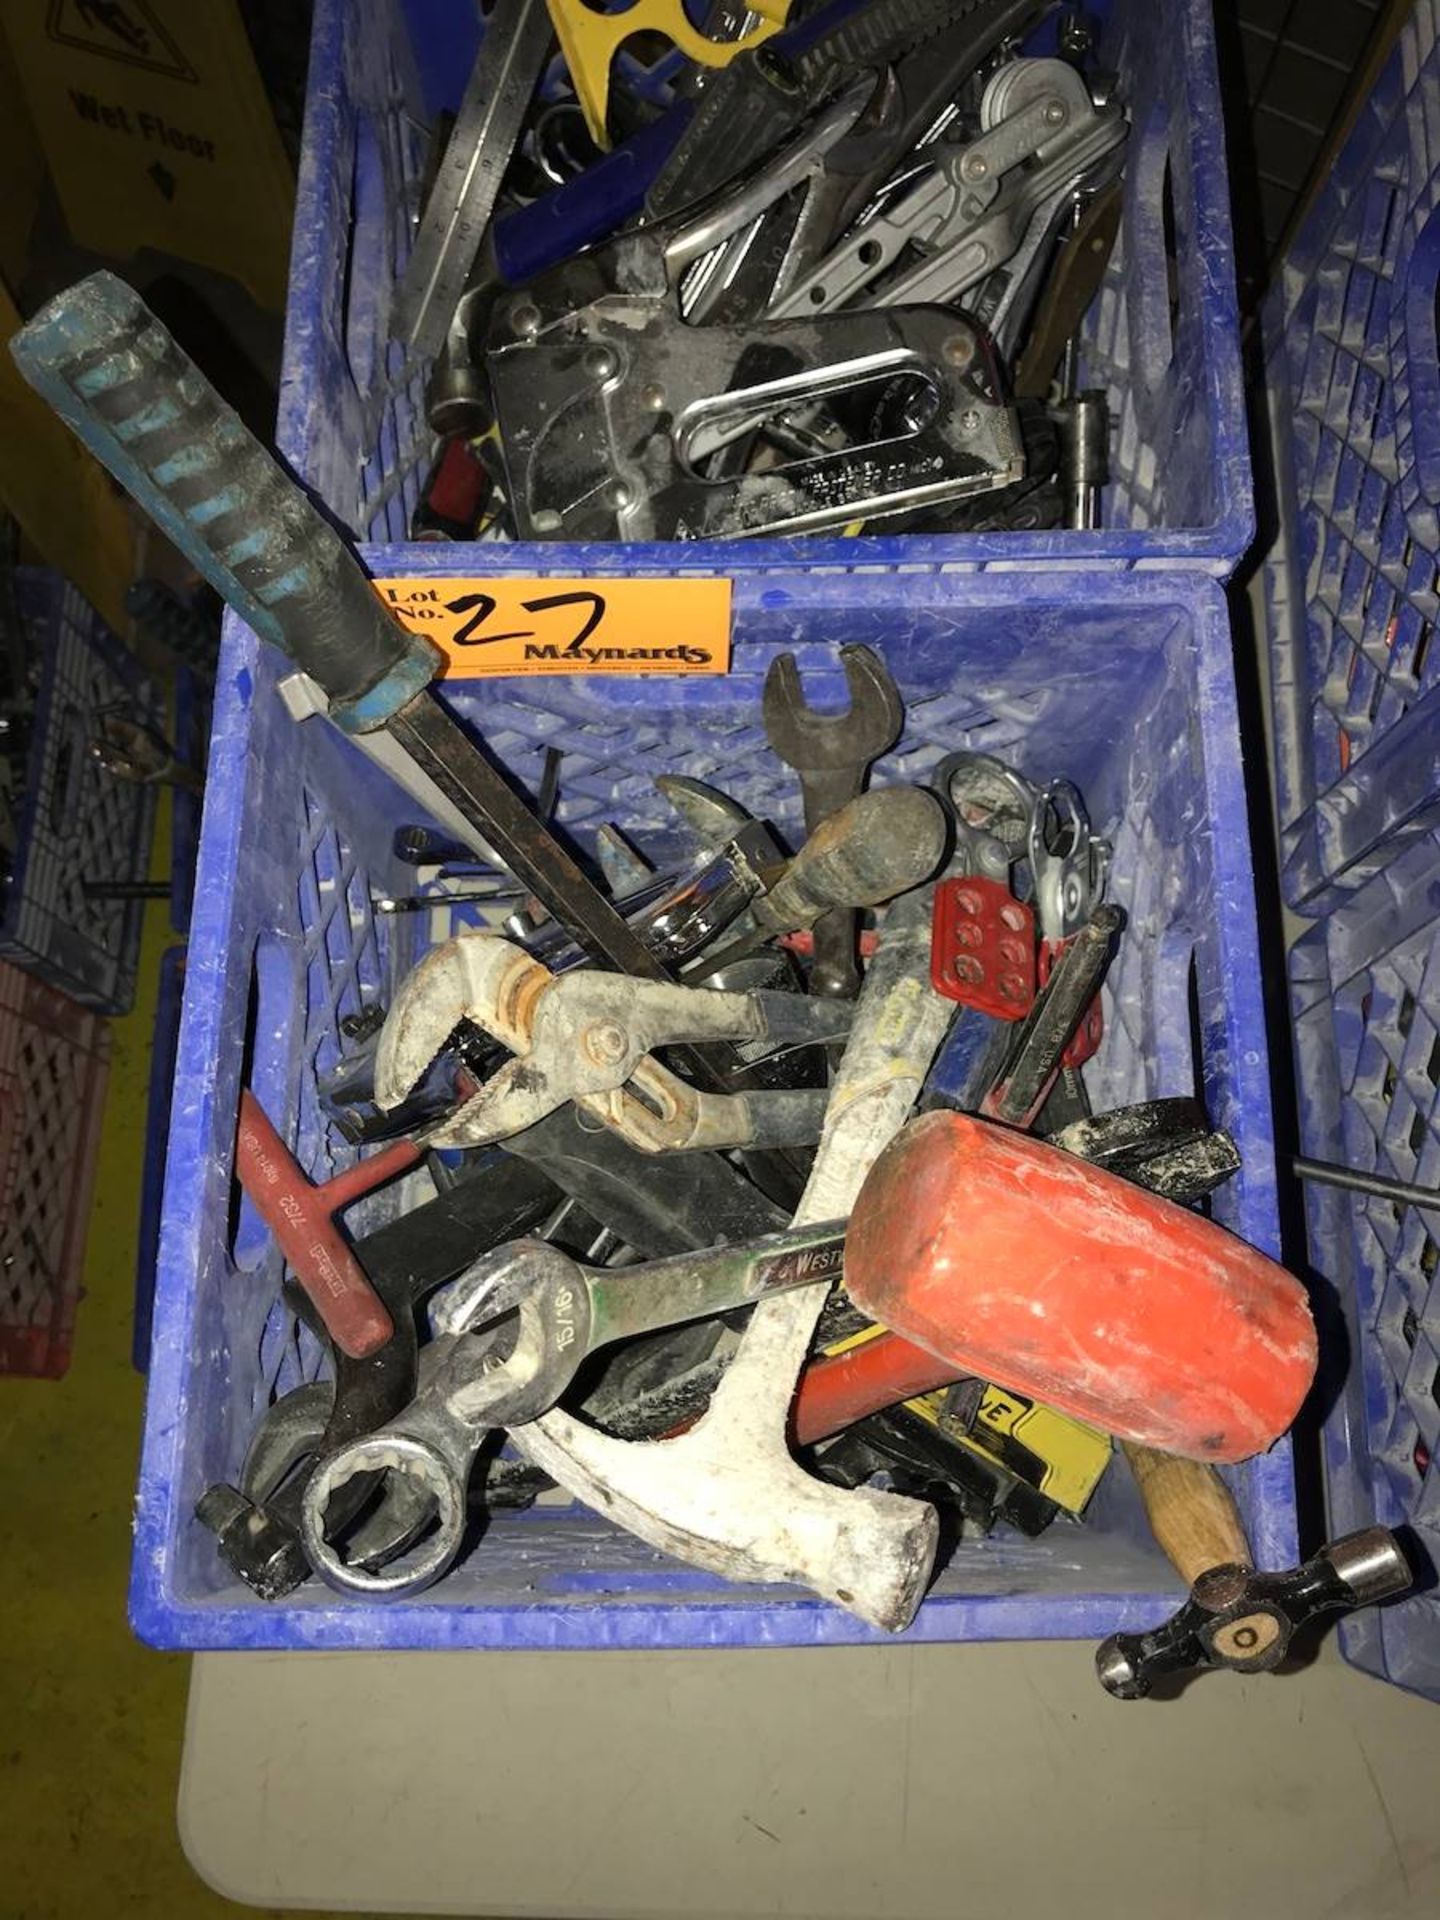 Lot of Assorted Hand Tools - Image 2 of 3